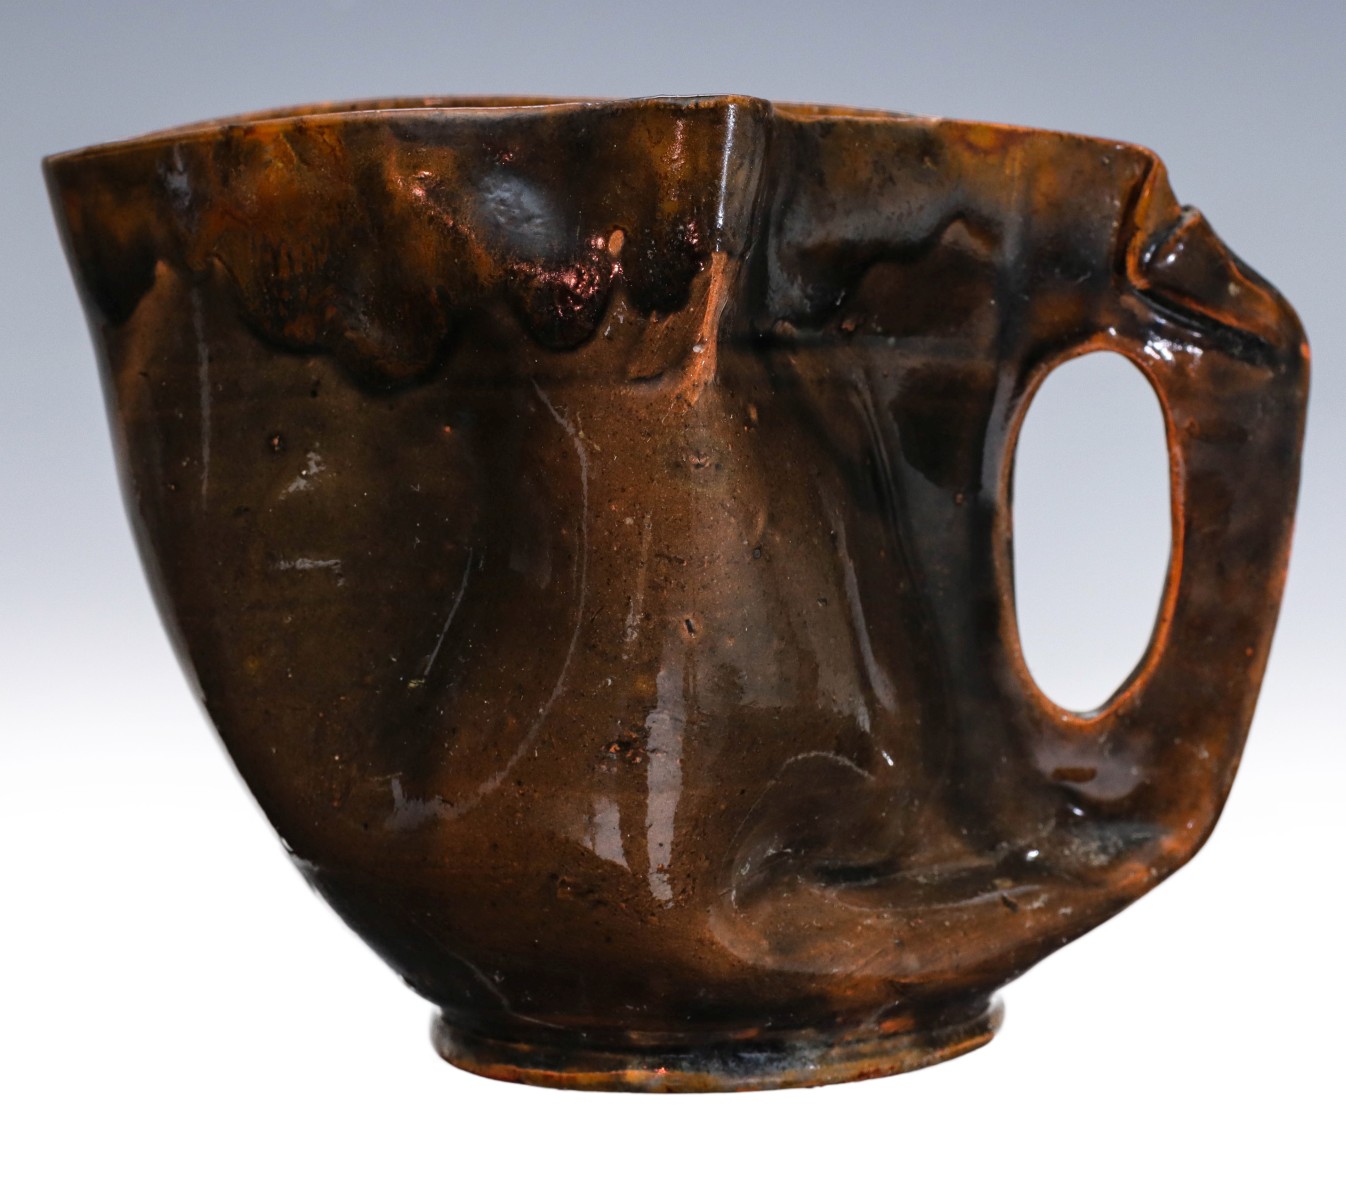 GEORGE OHR (1857-1918) ART POTTERY PITCHER